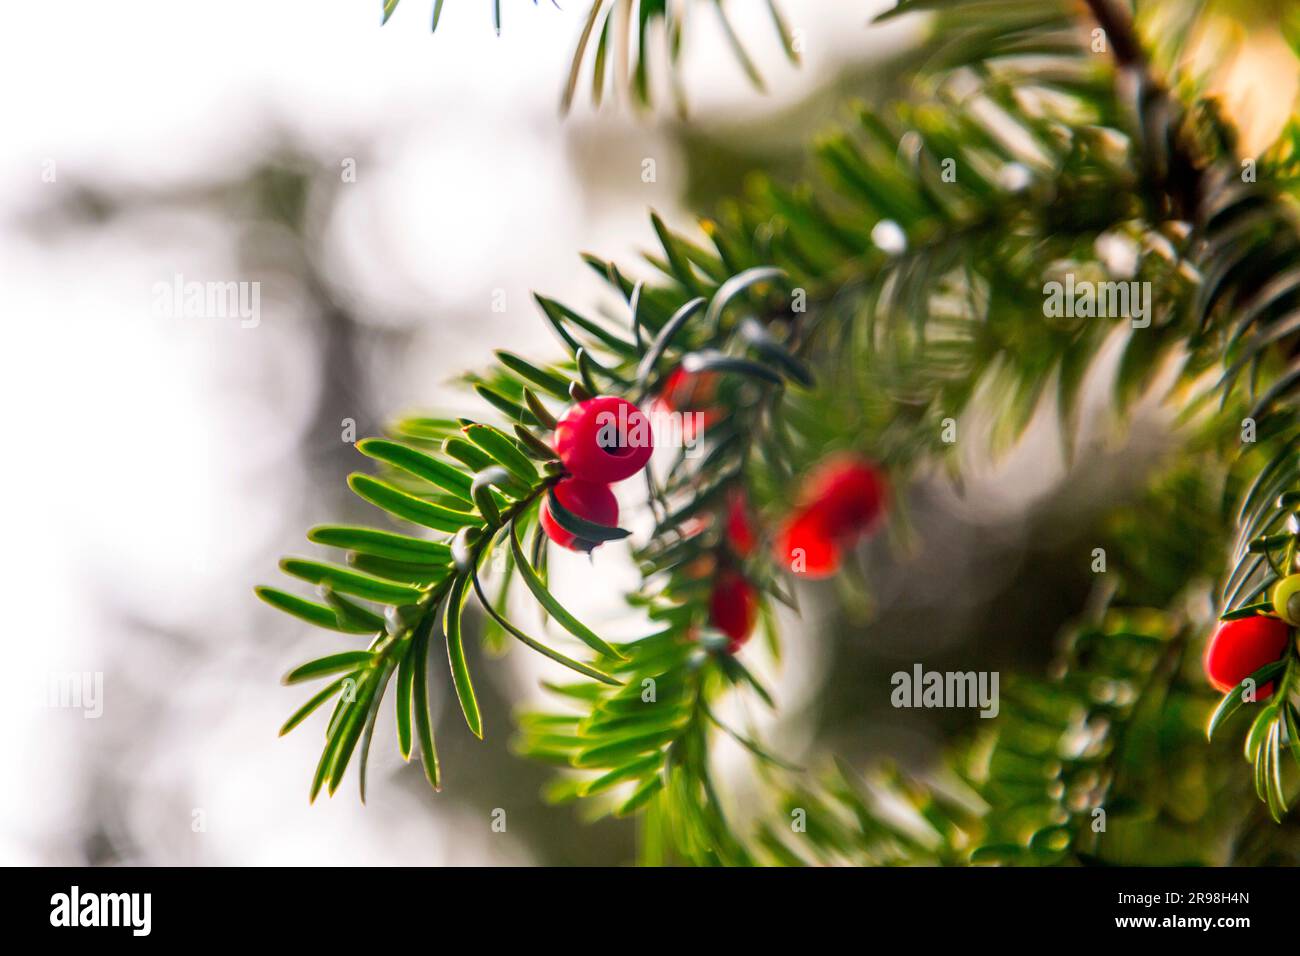 Poisonous red berries of taxus baccata or english yew tree, close up Stock Photo